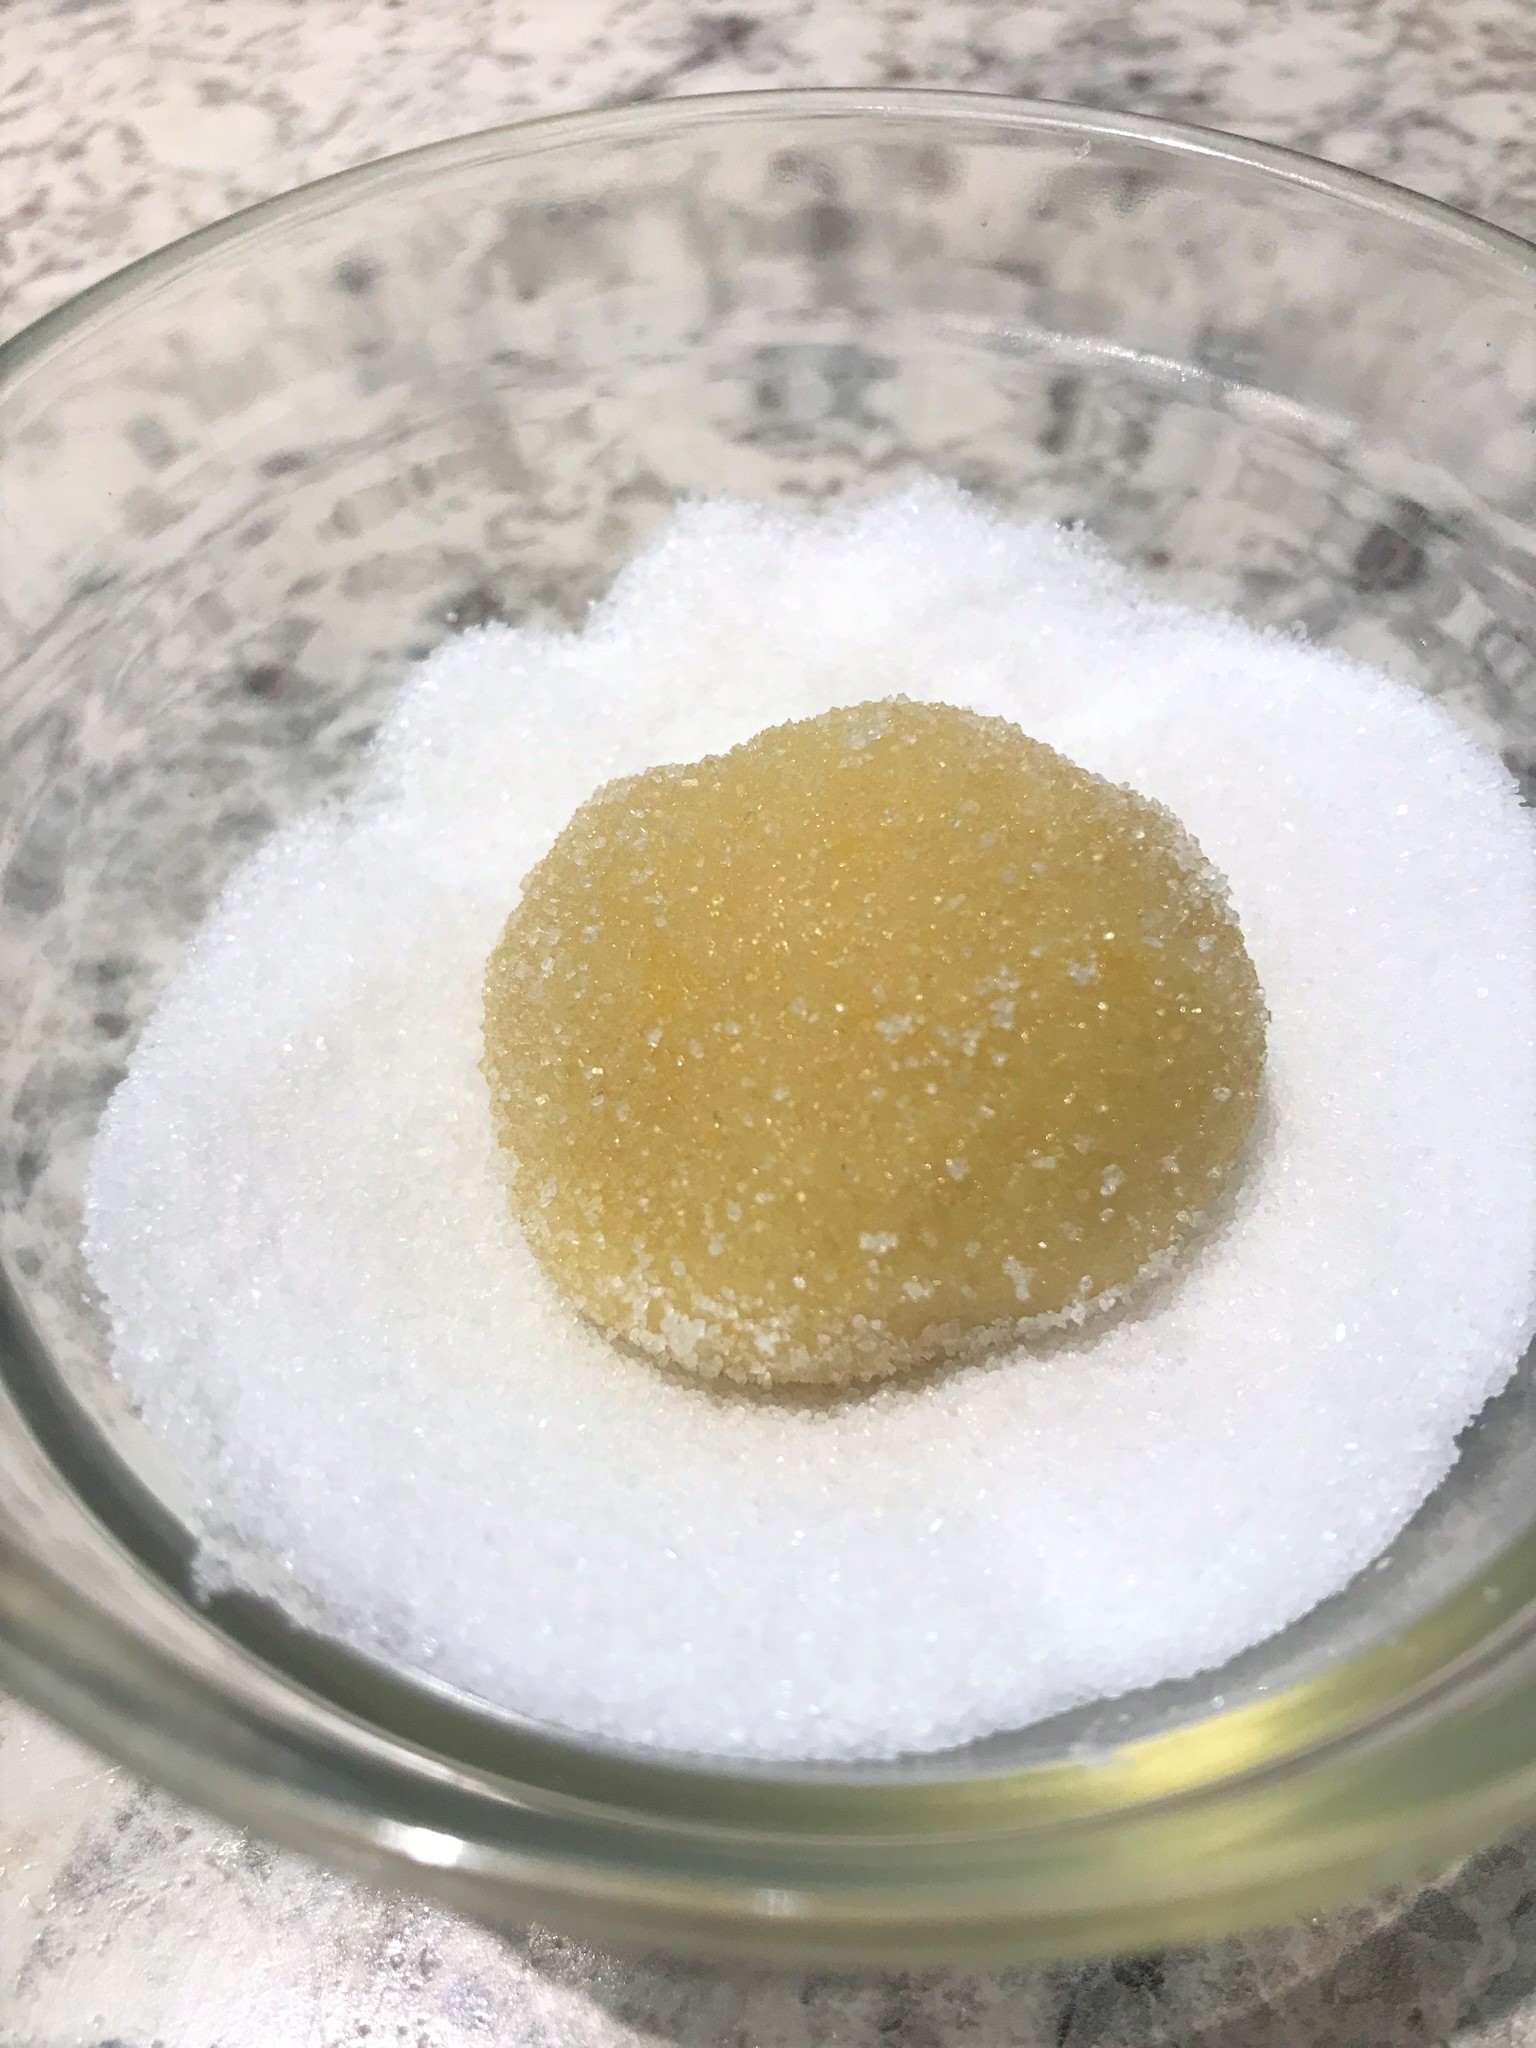 oil sugar cookie without butter dough ball being coated in sugar